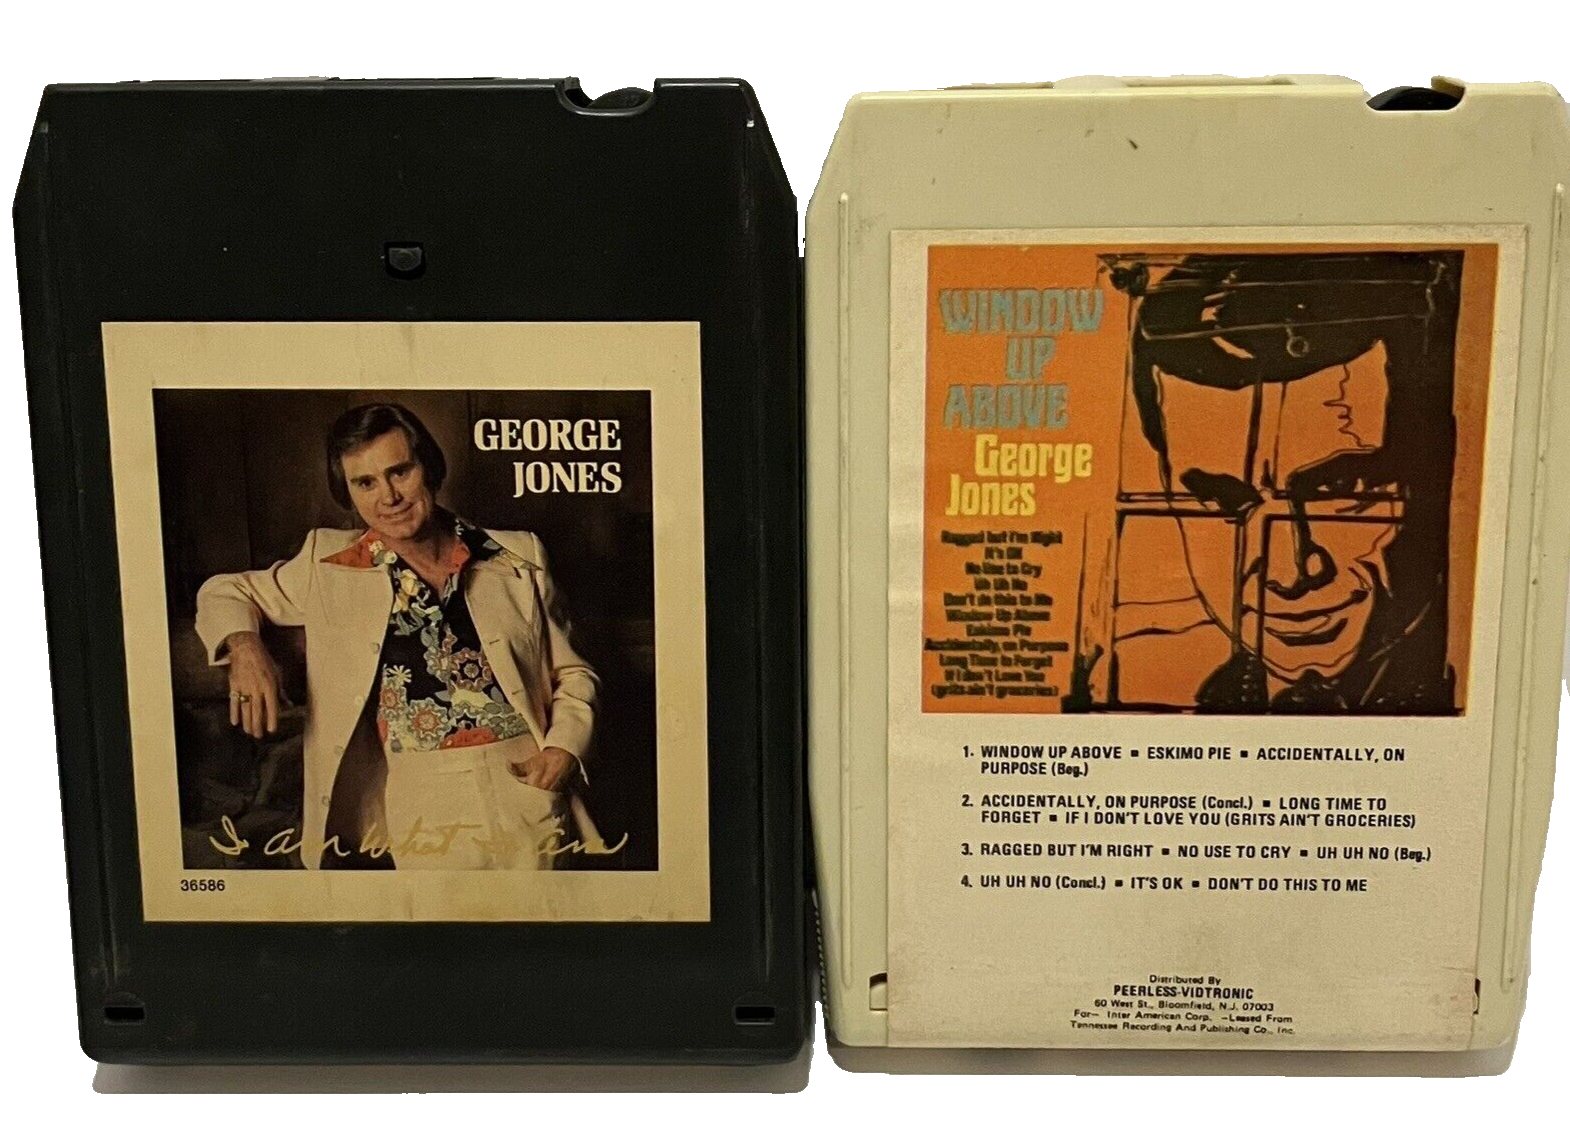 Primary image for George Jones 8-Track Tape Lot of 2 I Am What I Am & Window Up Above